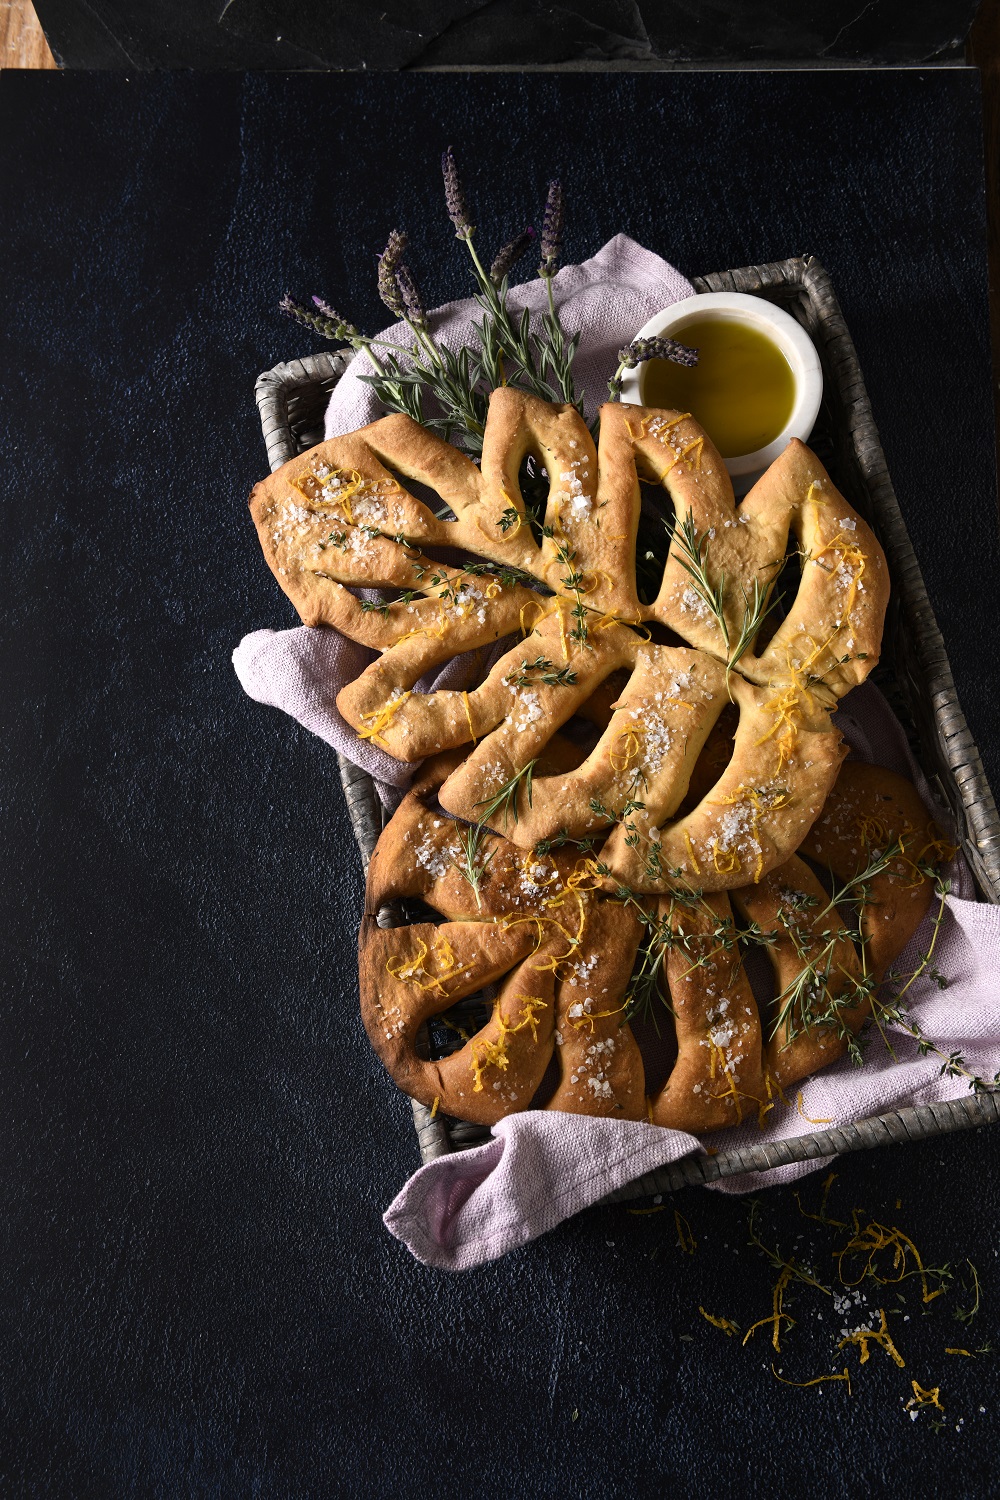 Fougasse with orange zest and Herbes de Provence